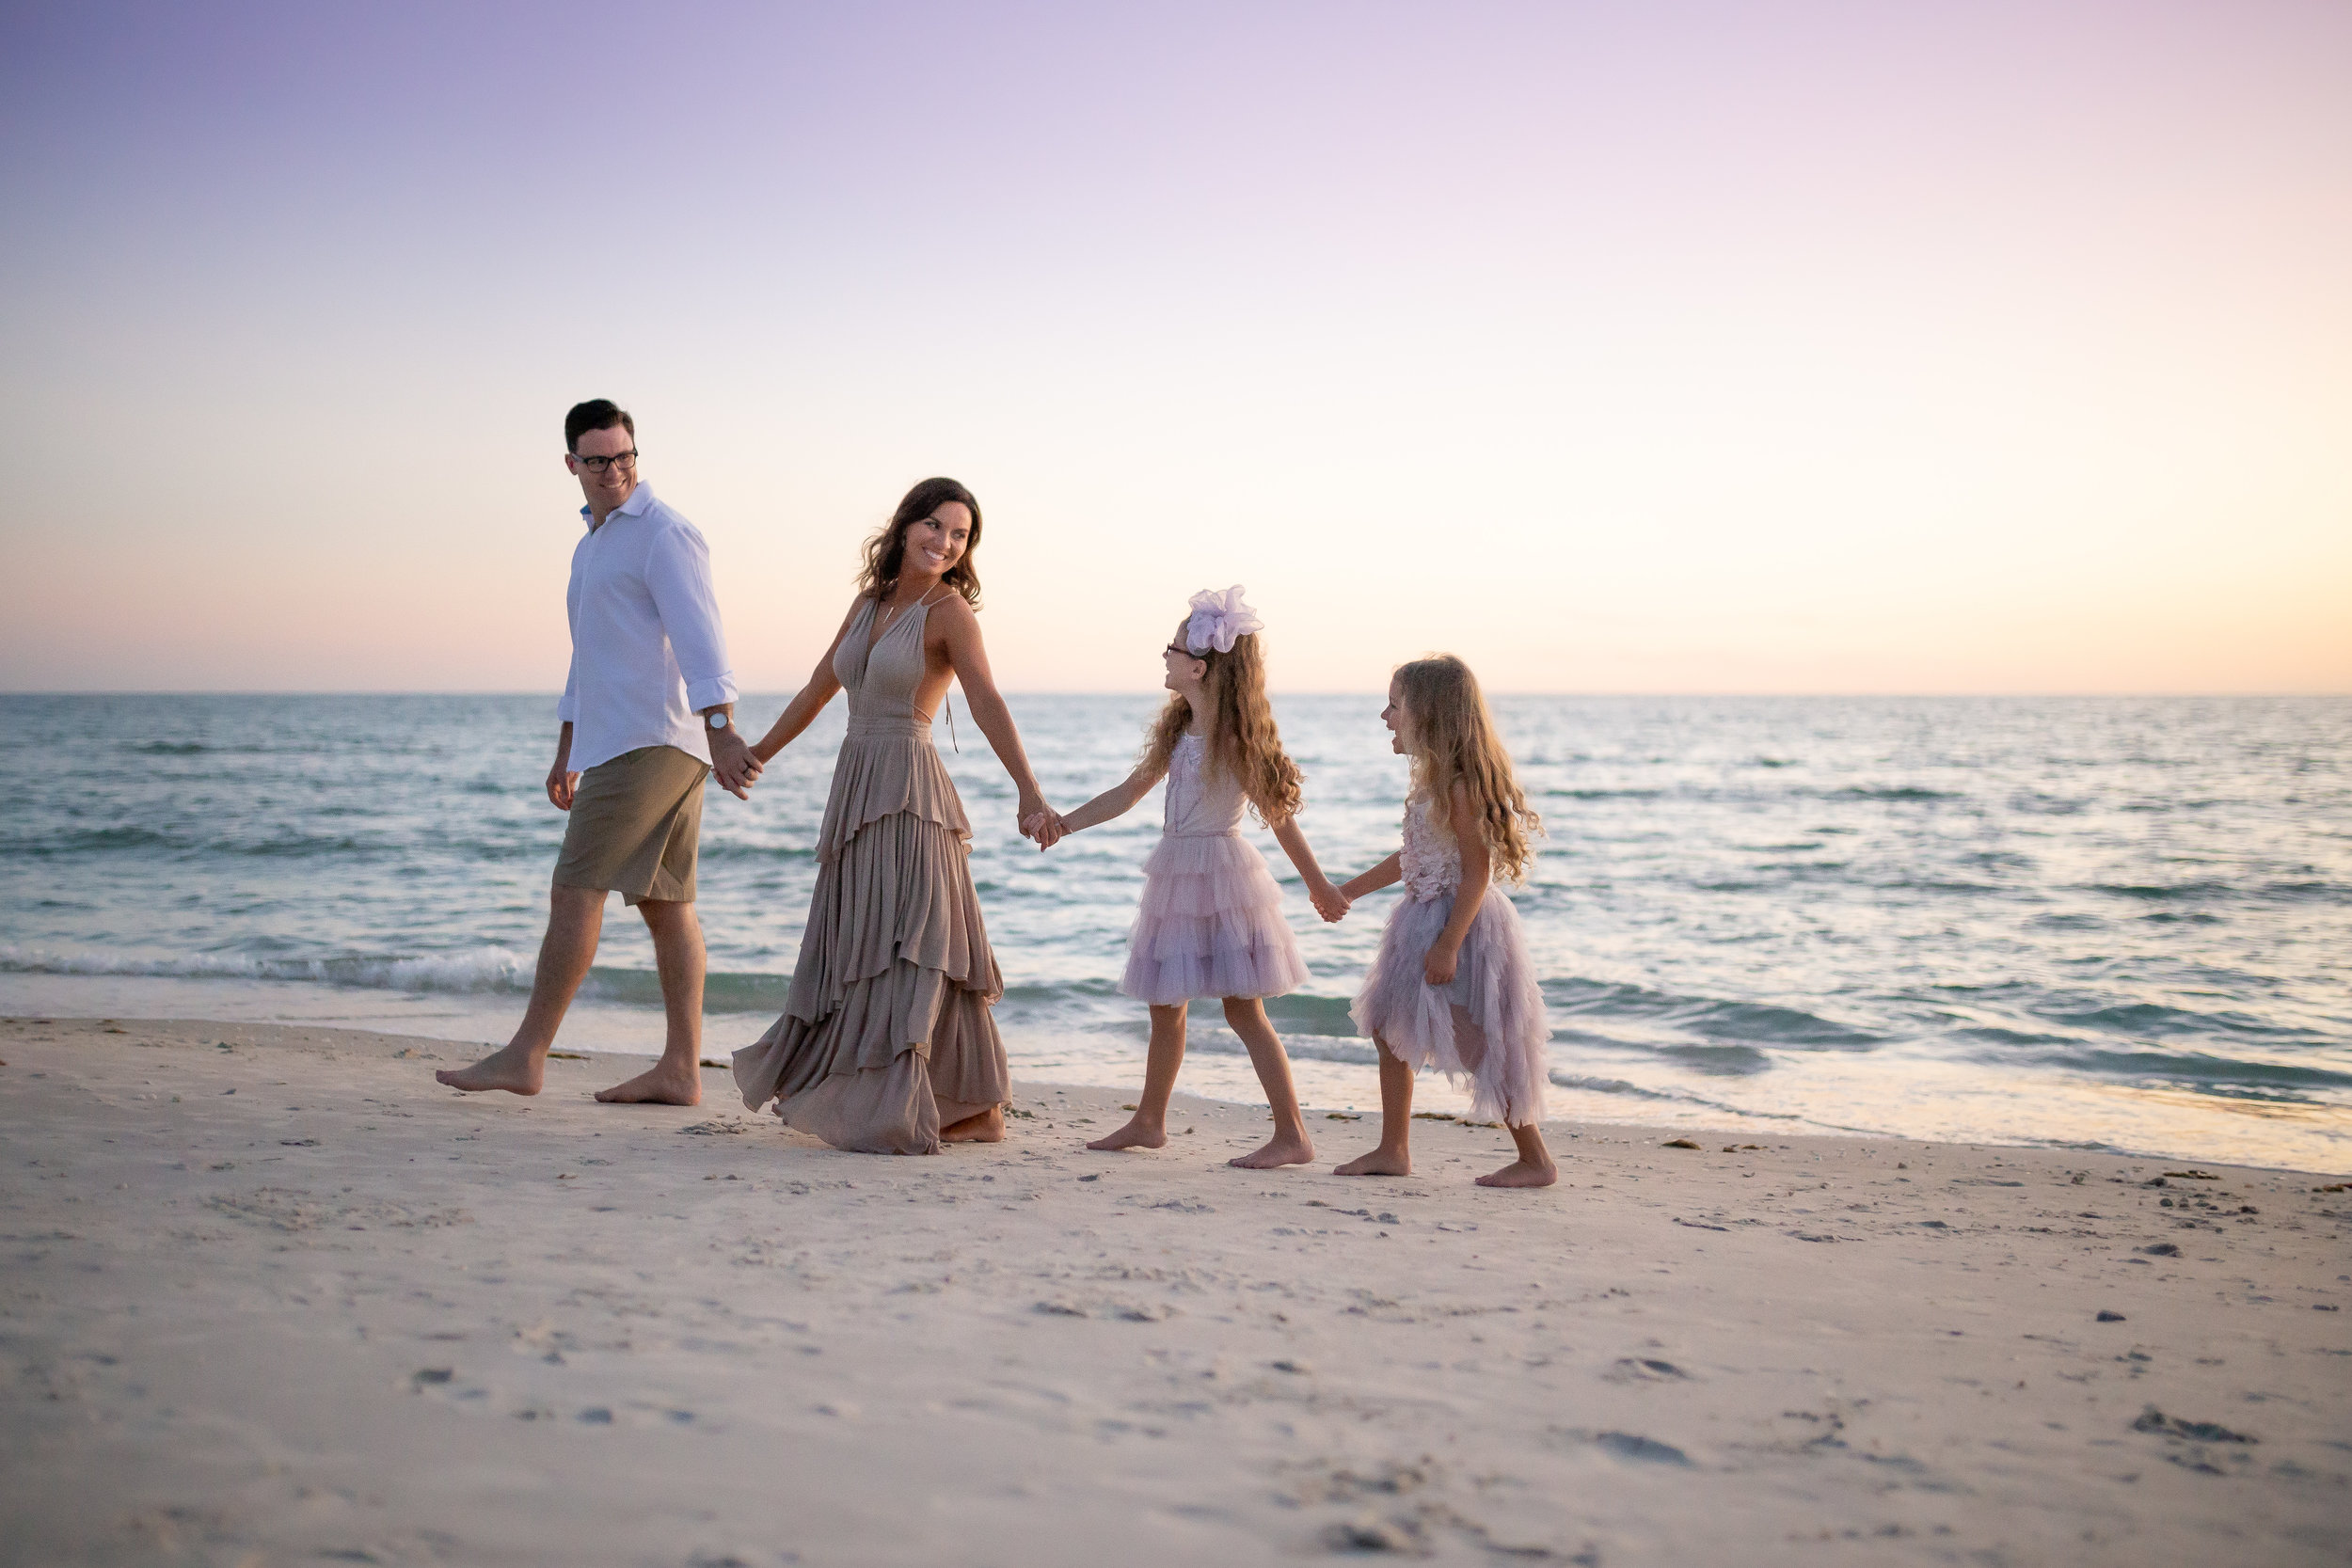 5 Must-Have Outdoor Family Session Poses by Daphodil Photo